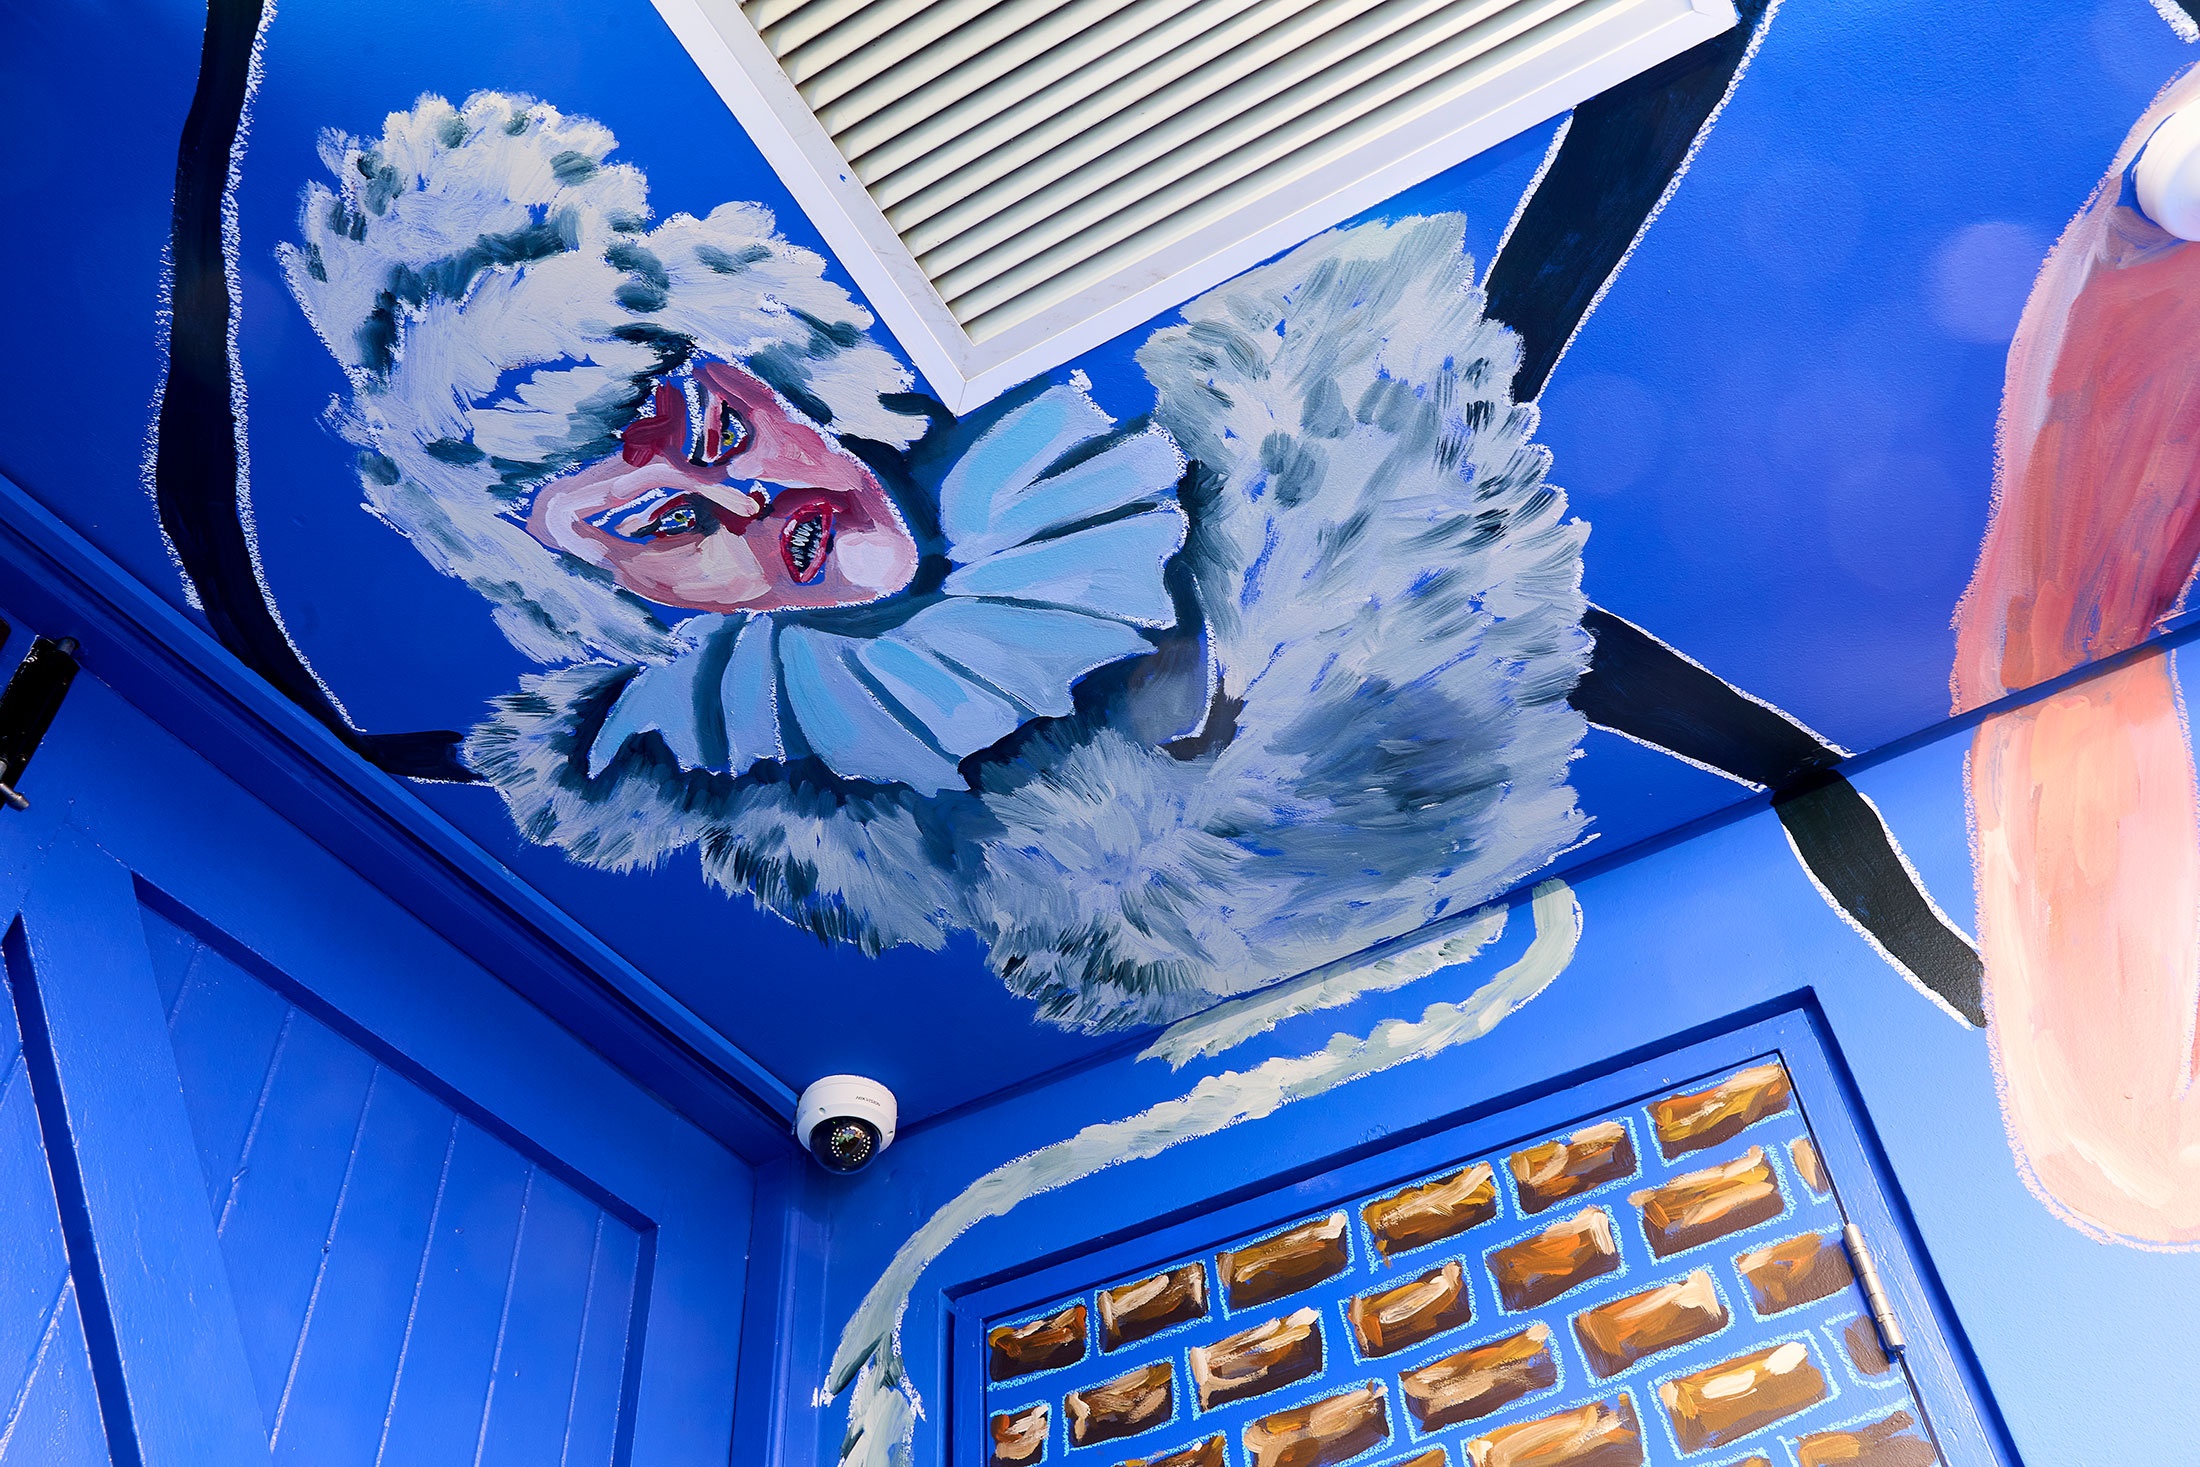 Installation photograph of Dominique Cheminais’ residency in A4’s Goods project space. A detail of a painted mural on a blue wall shows a flailing humanoid figure adjacent to the air vent.
